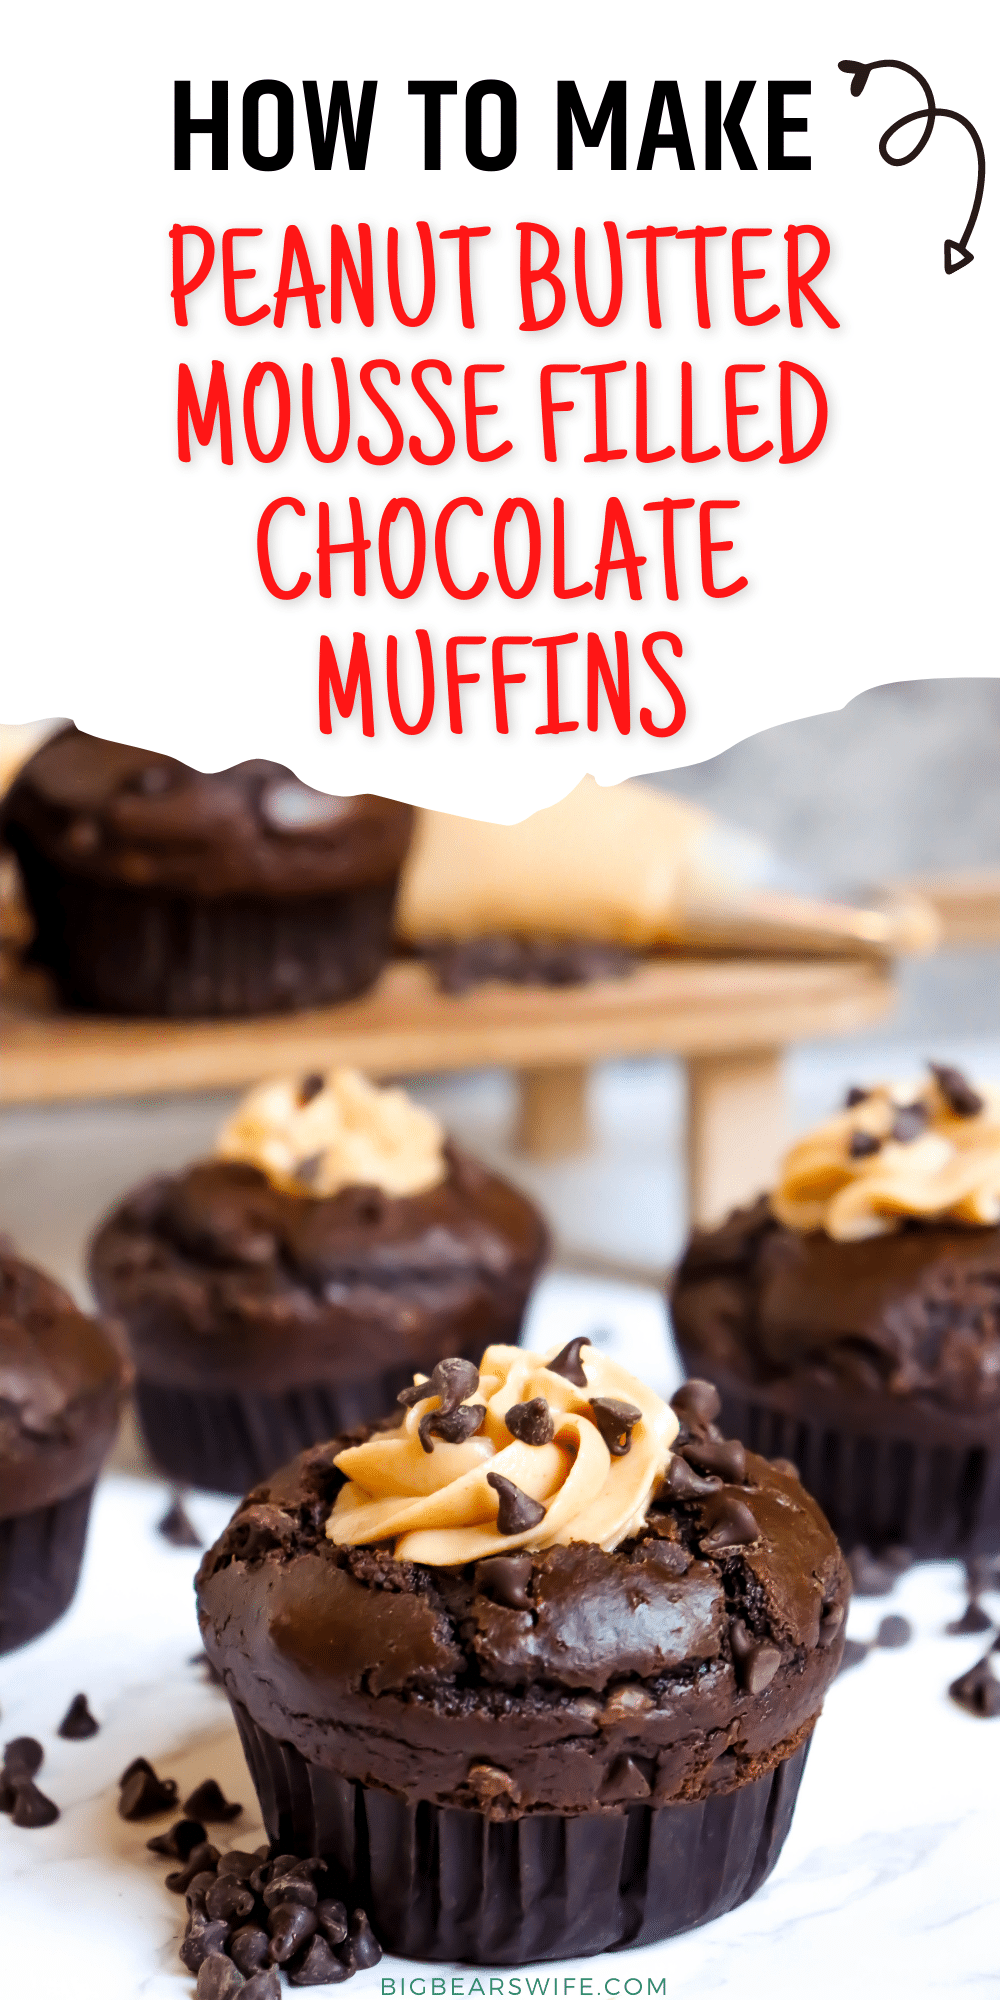 Peanut Butter Mousse filled Chocolate Muffins - Homemade chocolate muffins filled with an easy homemade peanut butter mousse are a welcome treat for breakfast, brunch, and (if you are lucky enough to have any leftover) dessert. via @bigbearswife